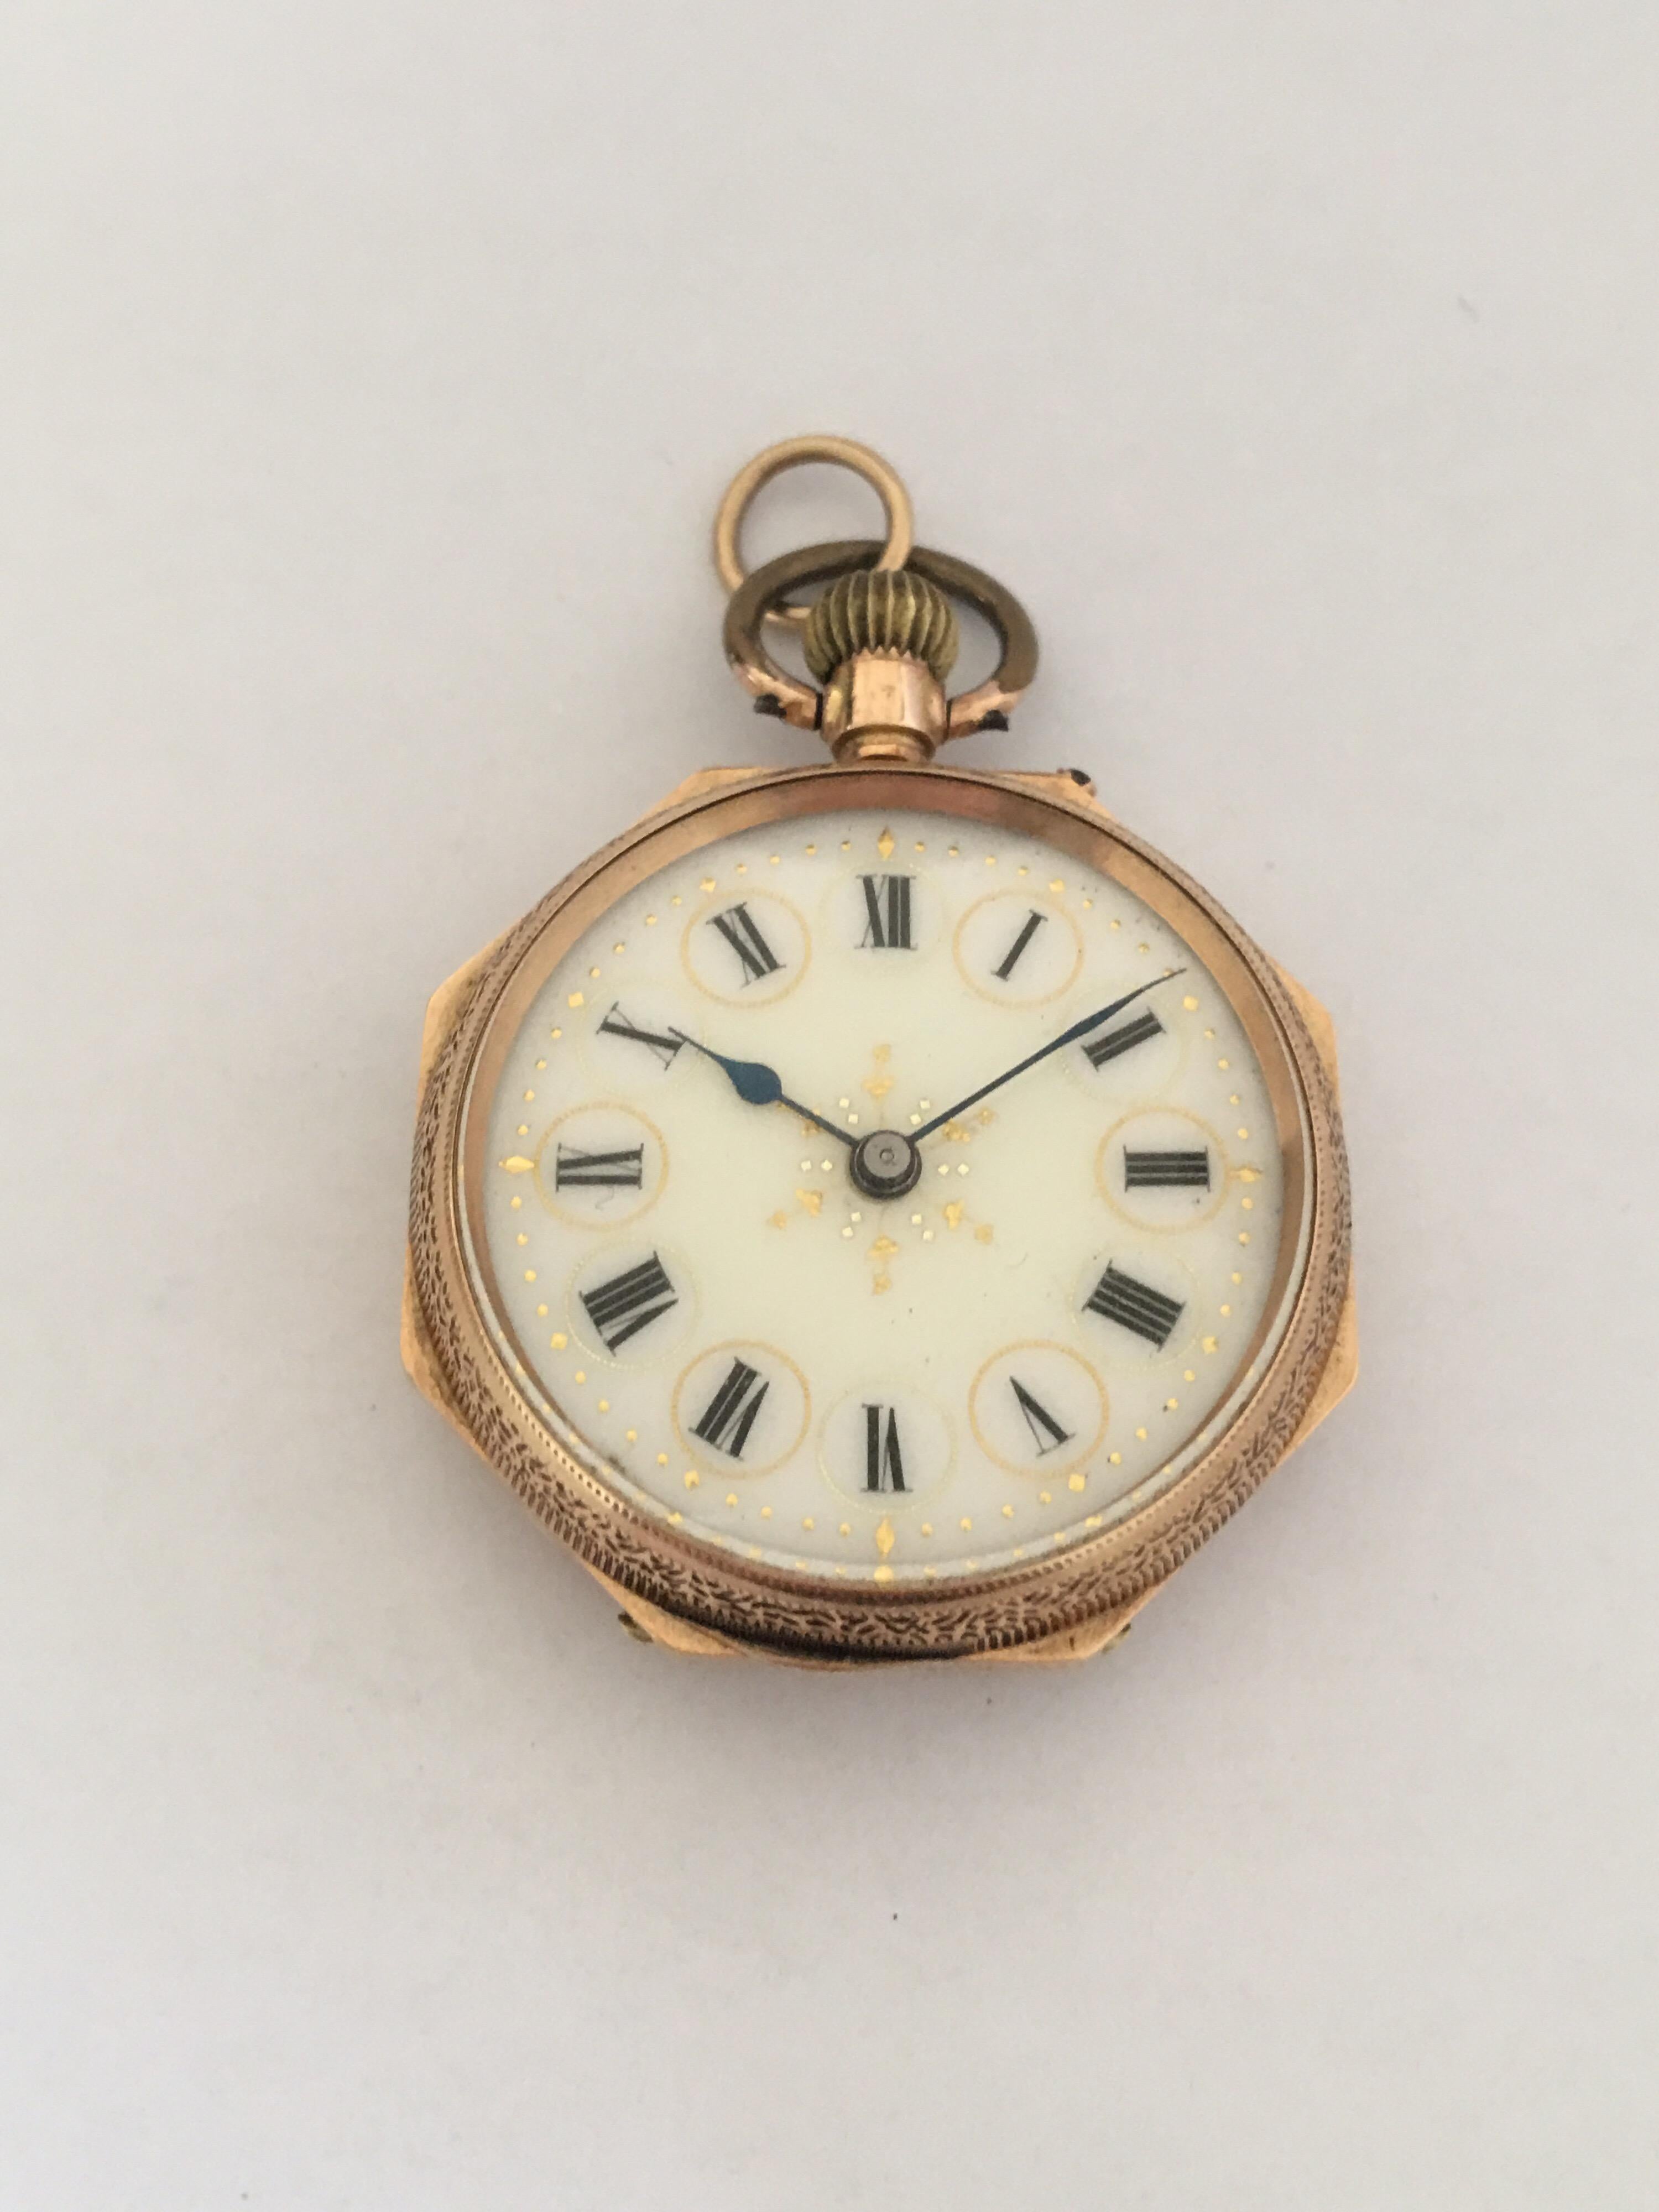 
Condition:

This beautiful full engraved case gold pocket watch is in good working condition and it is ticking nicely